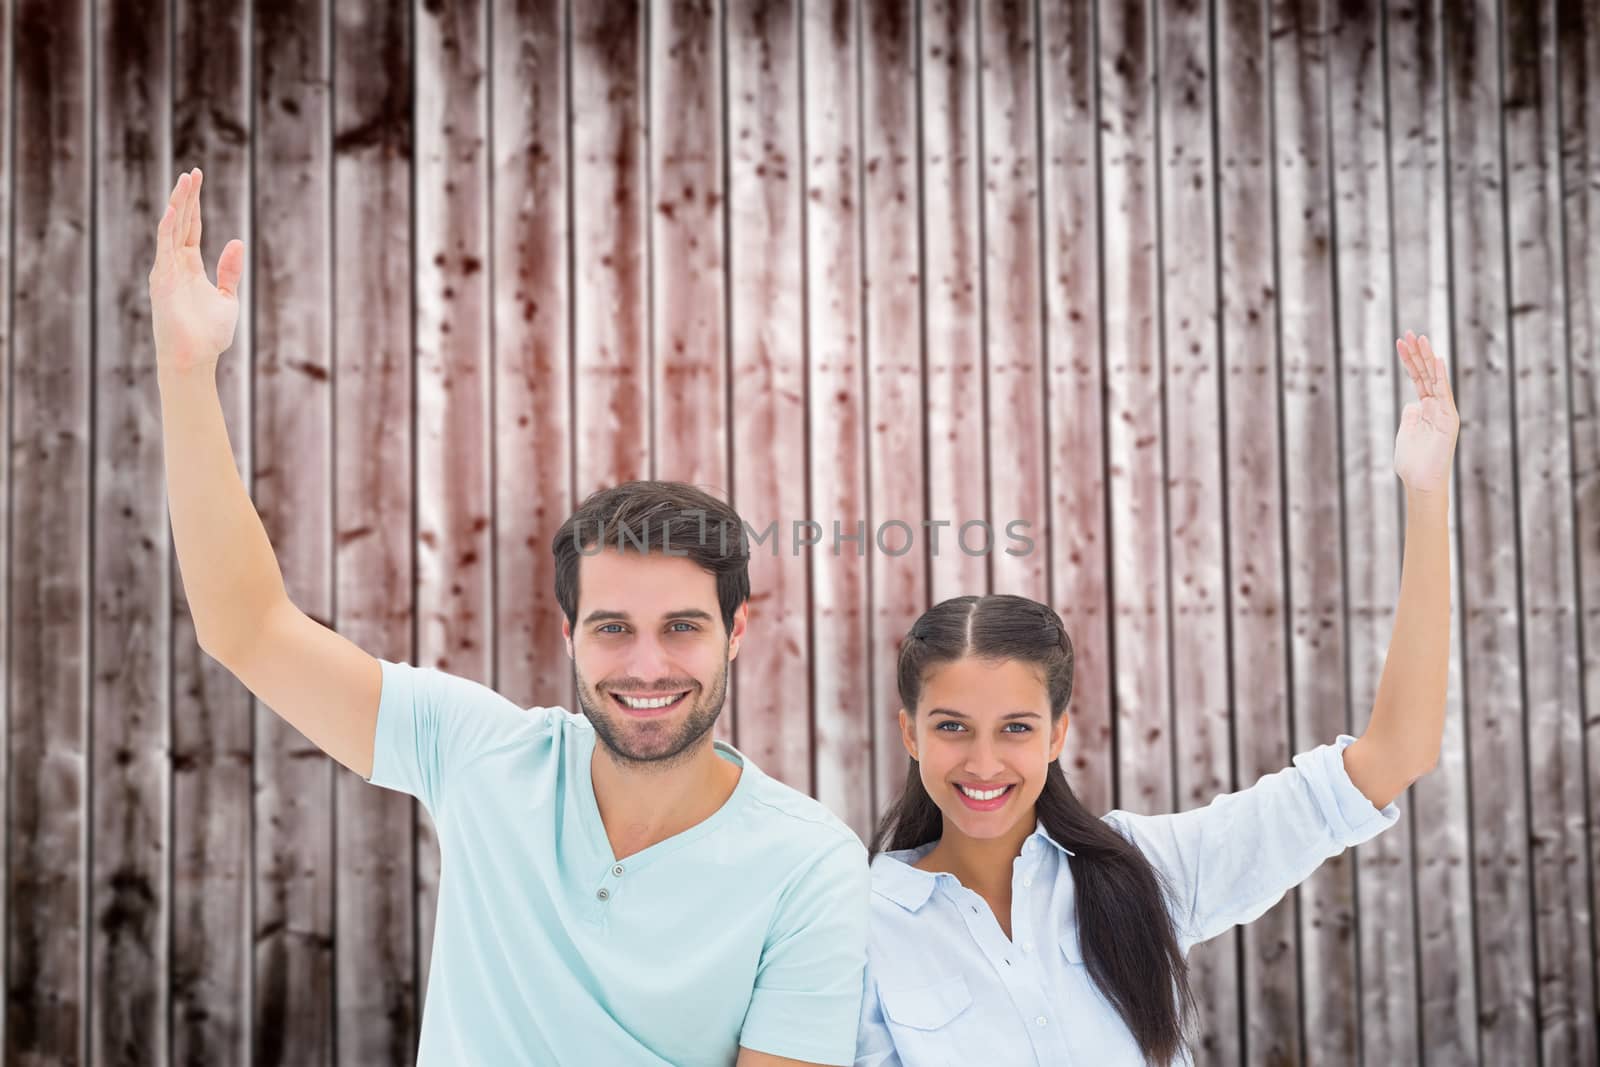 Cute couple sitting with arms raised against wooden planks